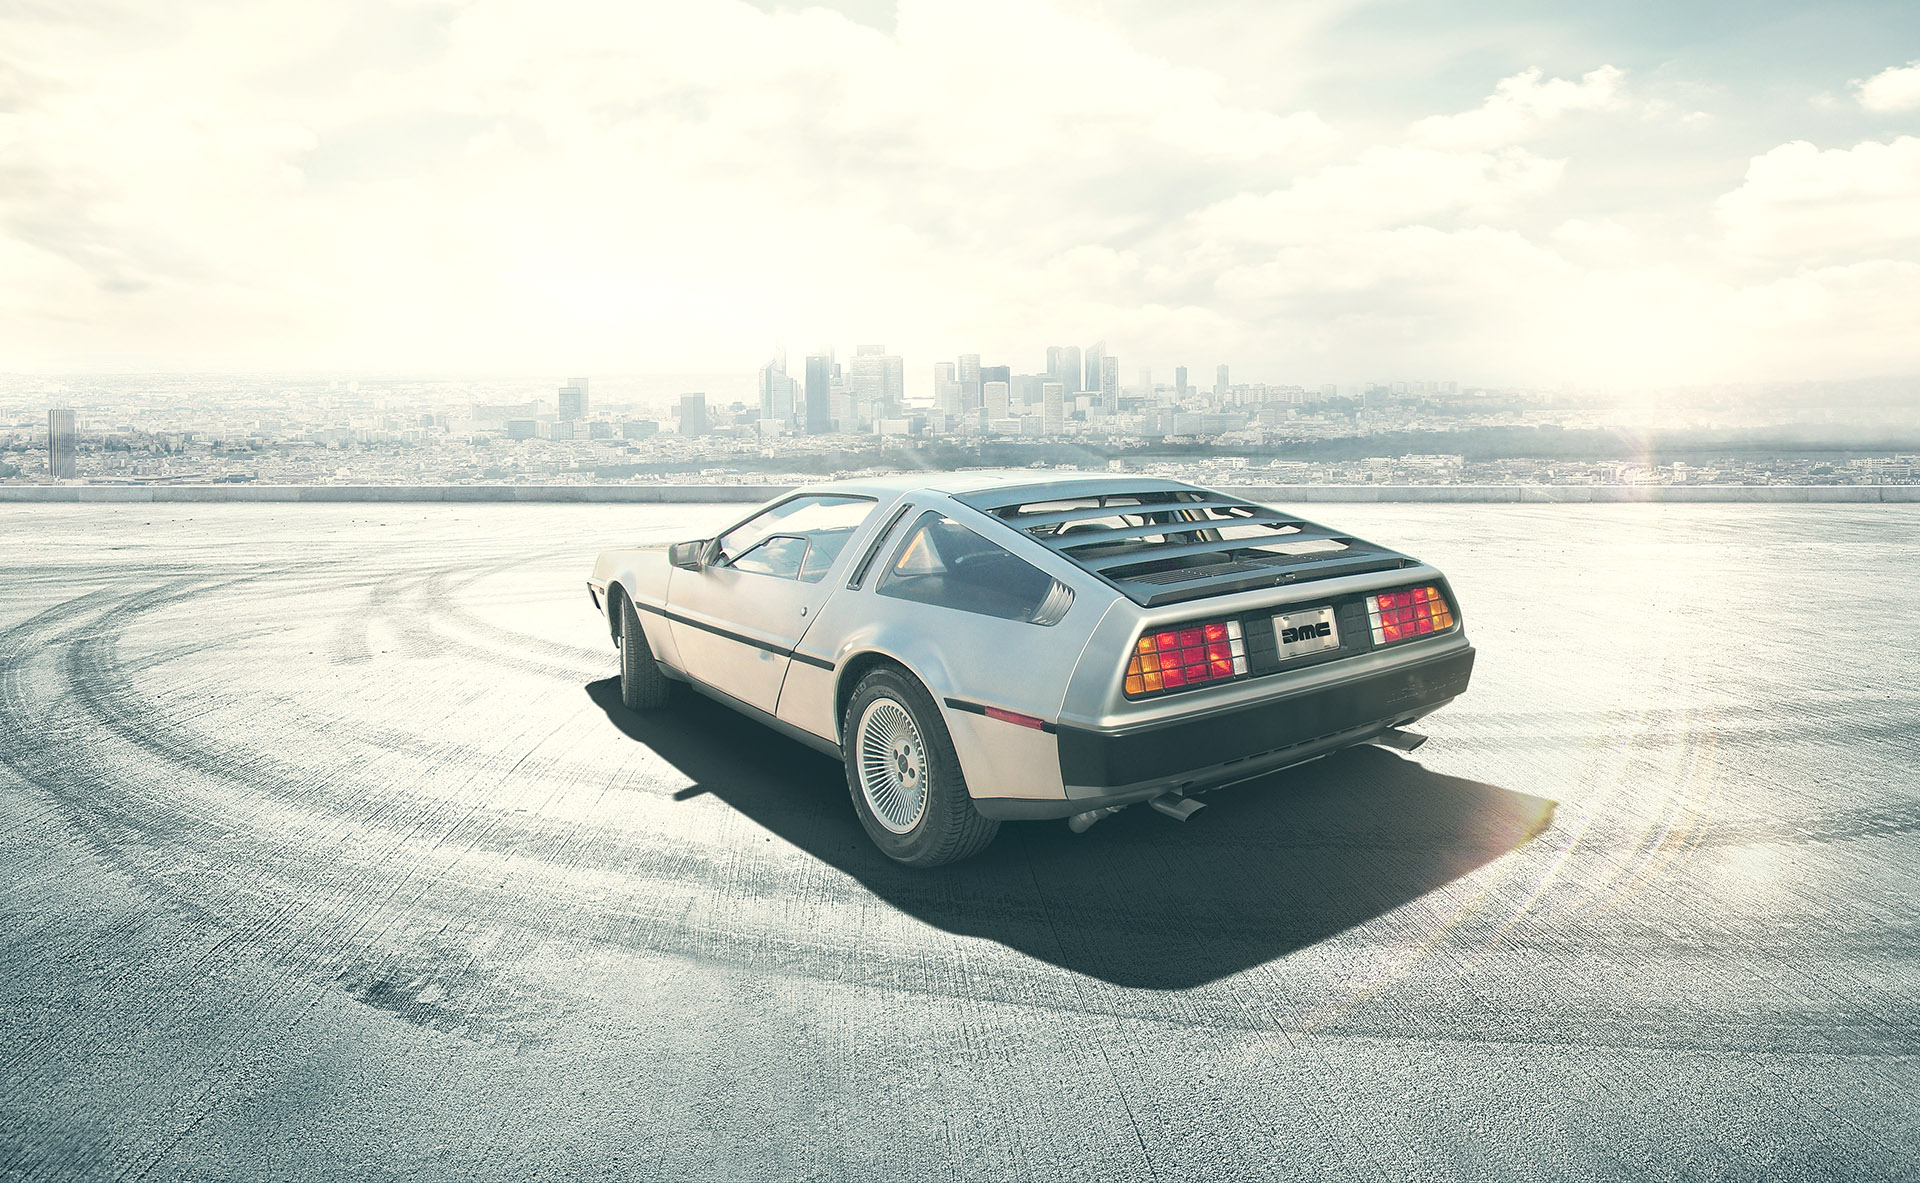 DeLorean Going Back To The Production Line To Make New Replica DMC-12 Vehicles